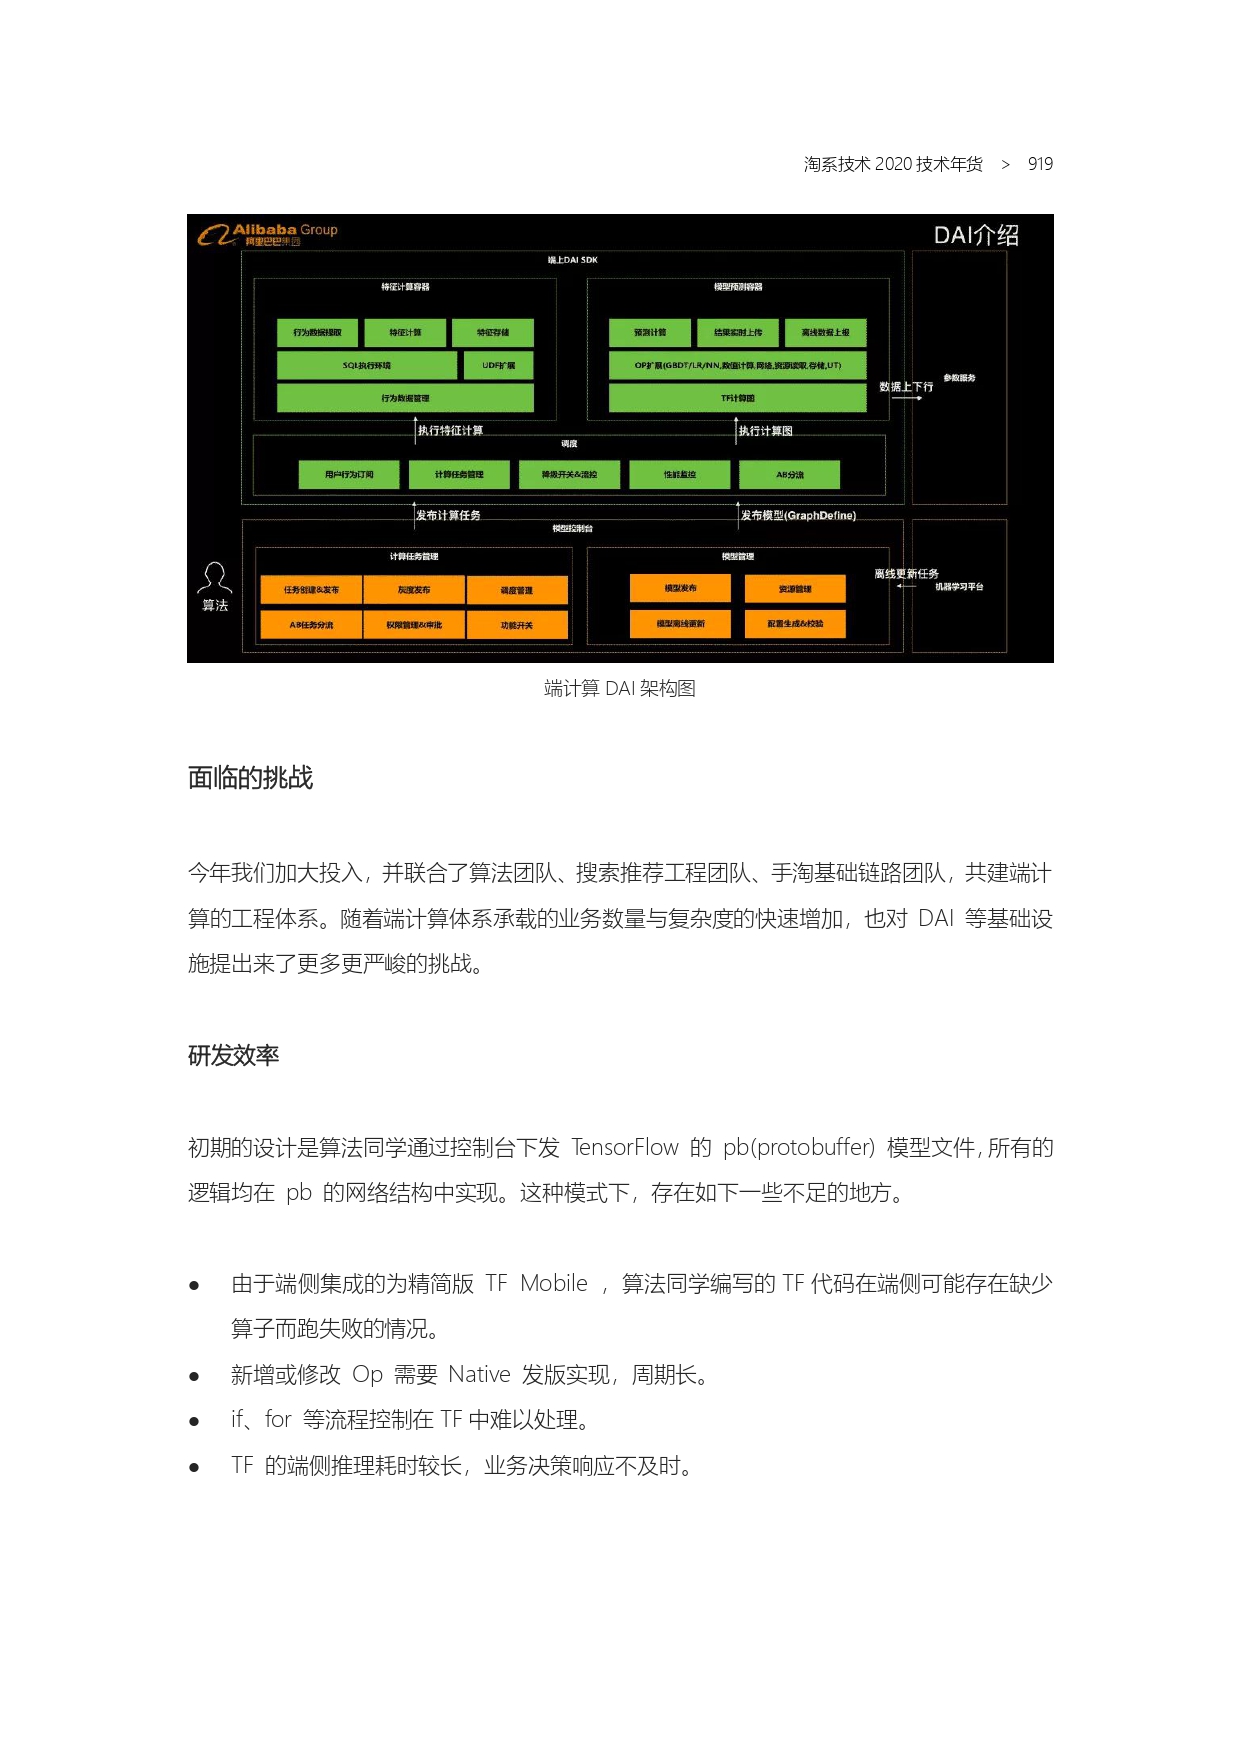 The Complete Works of Tao Technology 2020-571-1189-301-619_page-0049.jpg